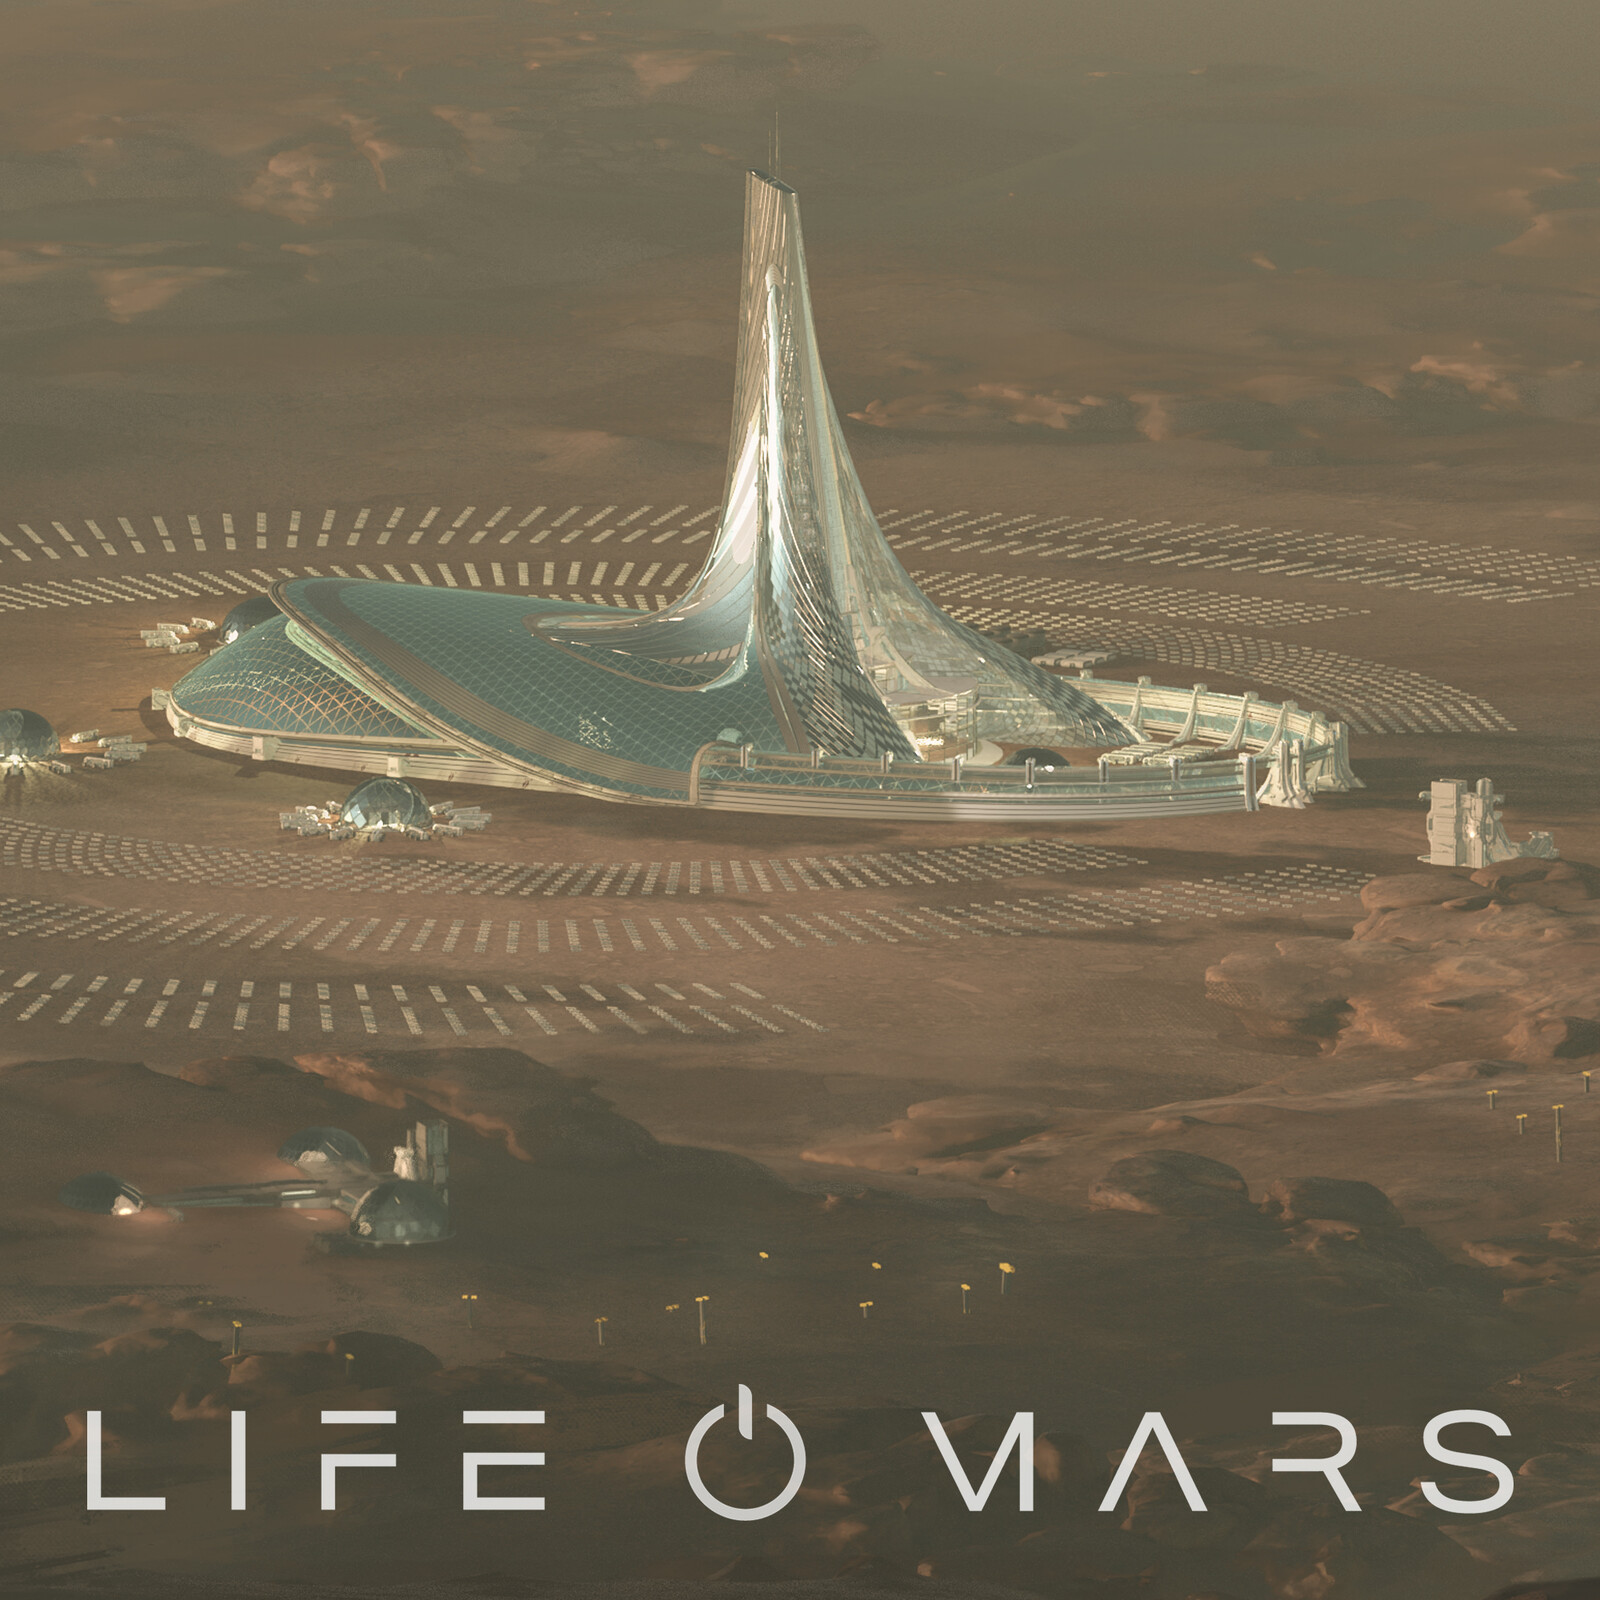 "Life on Mars " Building concept